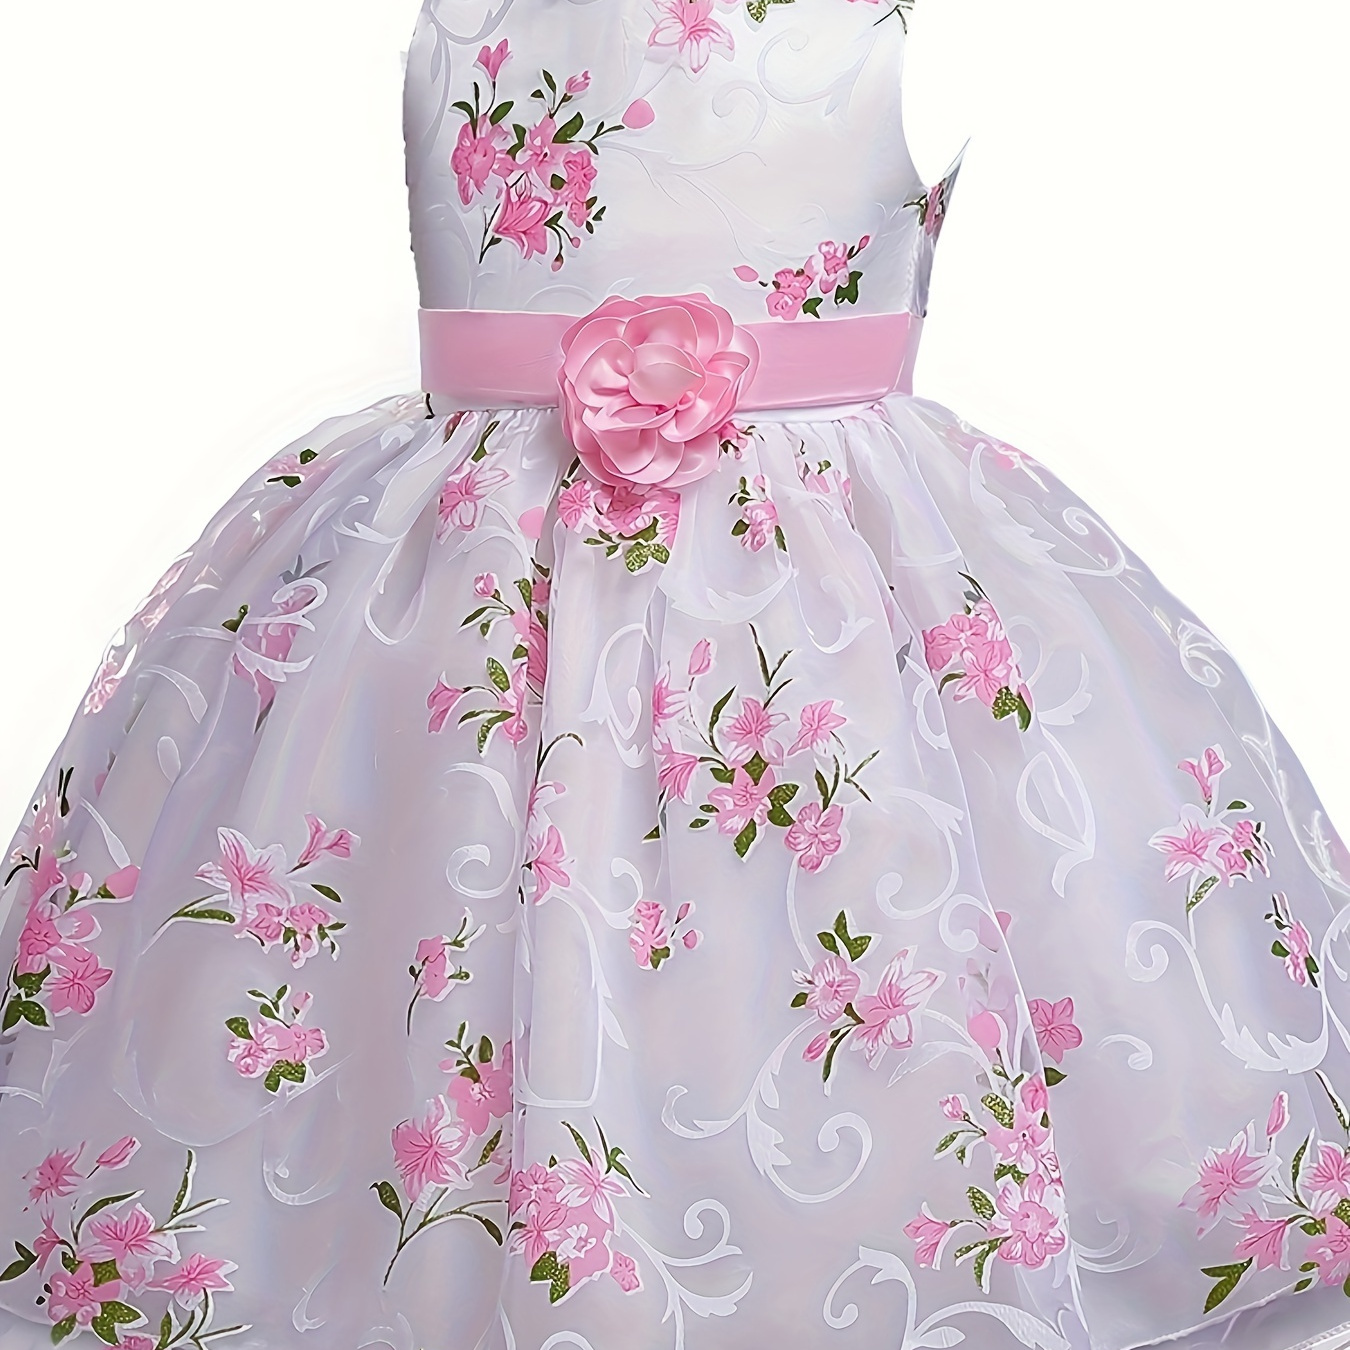 

Girls Floral Princess Dress, Elegant Spring/summer/autumn Formal Gown, Kids Special Occasion Dress With Sash And Rose Detail